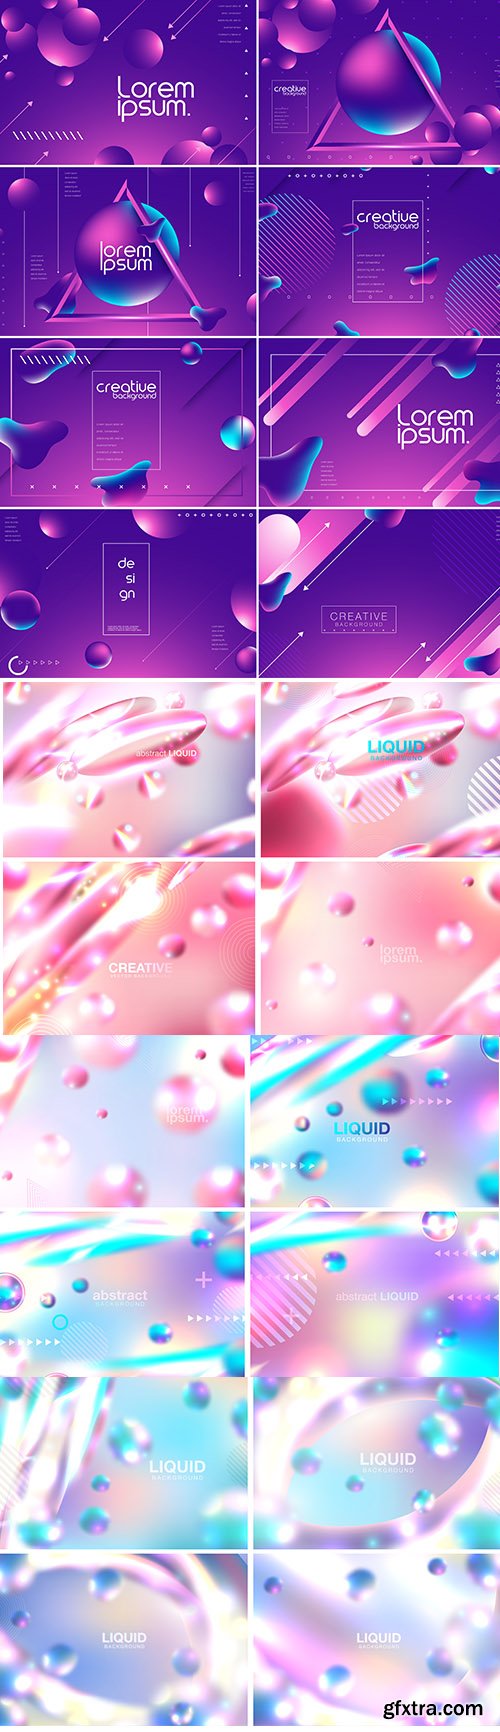 Abstract Vector Background with Liquid Bubbles